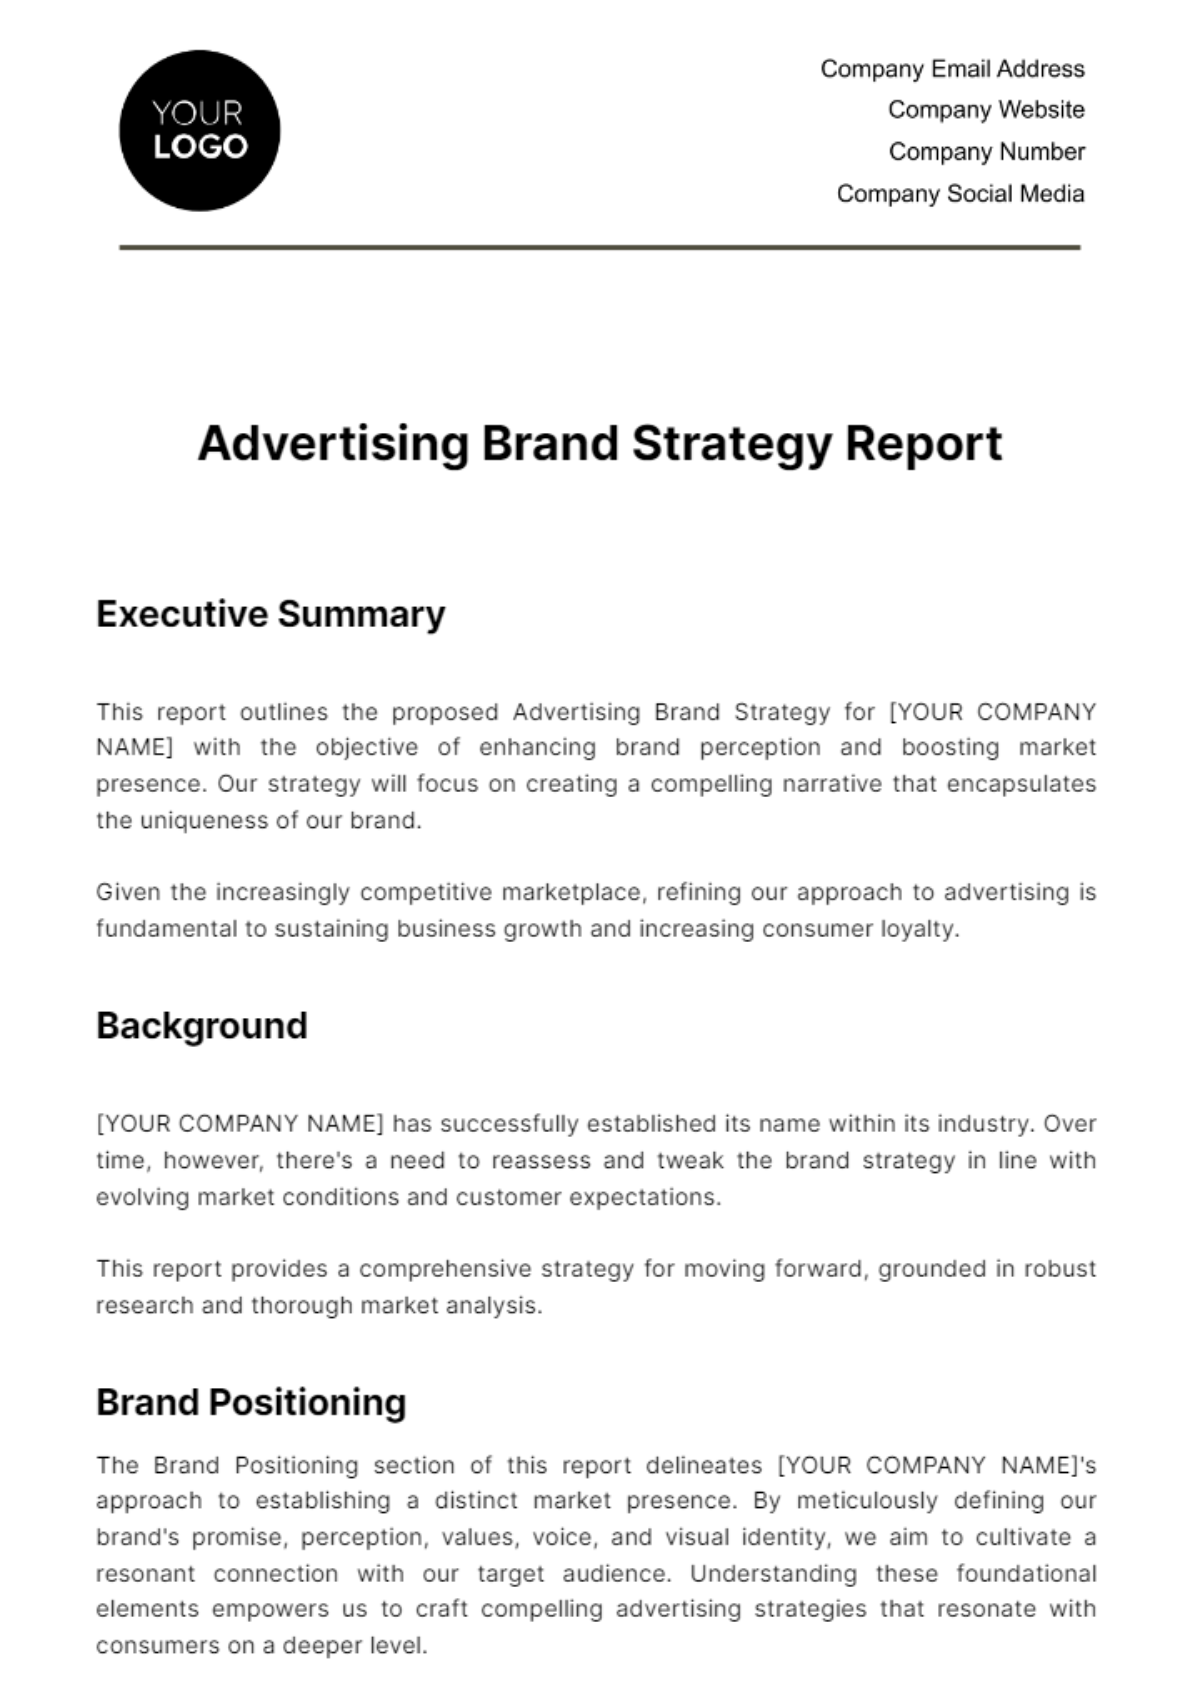 Free Advertising Brand Strategy Report Template